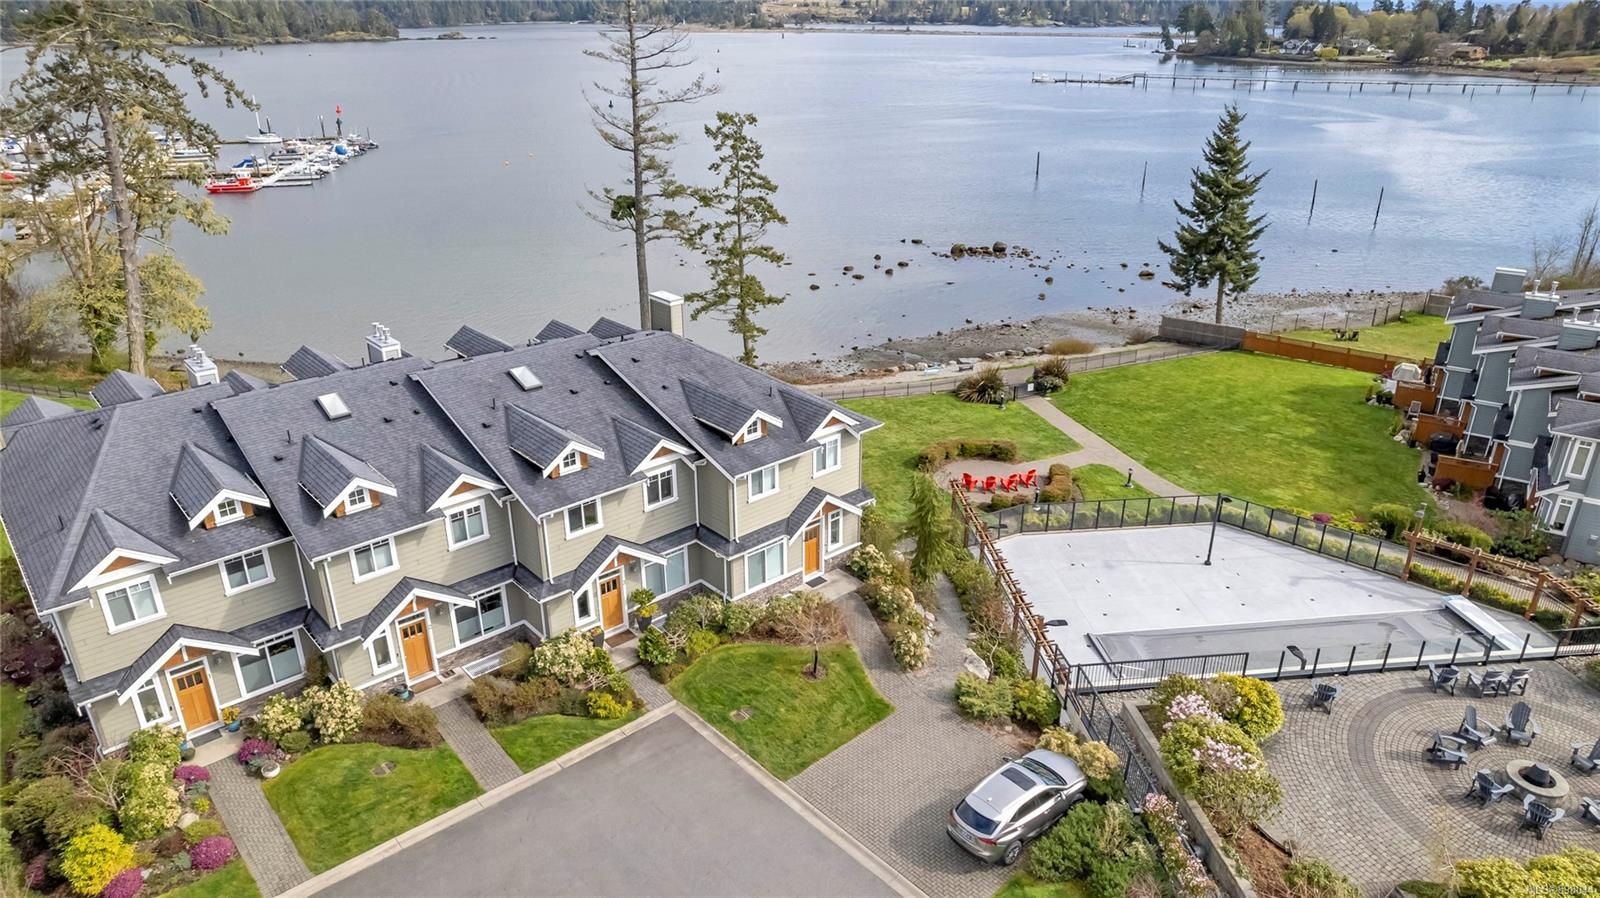 Open House. Open House on Sunday, July 31, 2022 12:00PM - 2:00PM
Stunning Oceanfront Sooke Townhouse in Heron View with 4 bedrooms and 4 bathrooms and all the amenities you can imagine. Open house this SUNDAY JULY 31st 12 pm to 2pm. $1,199,000.00 and Pric